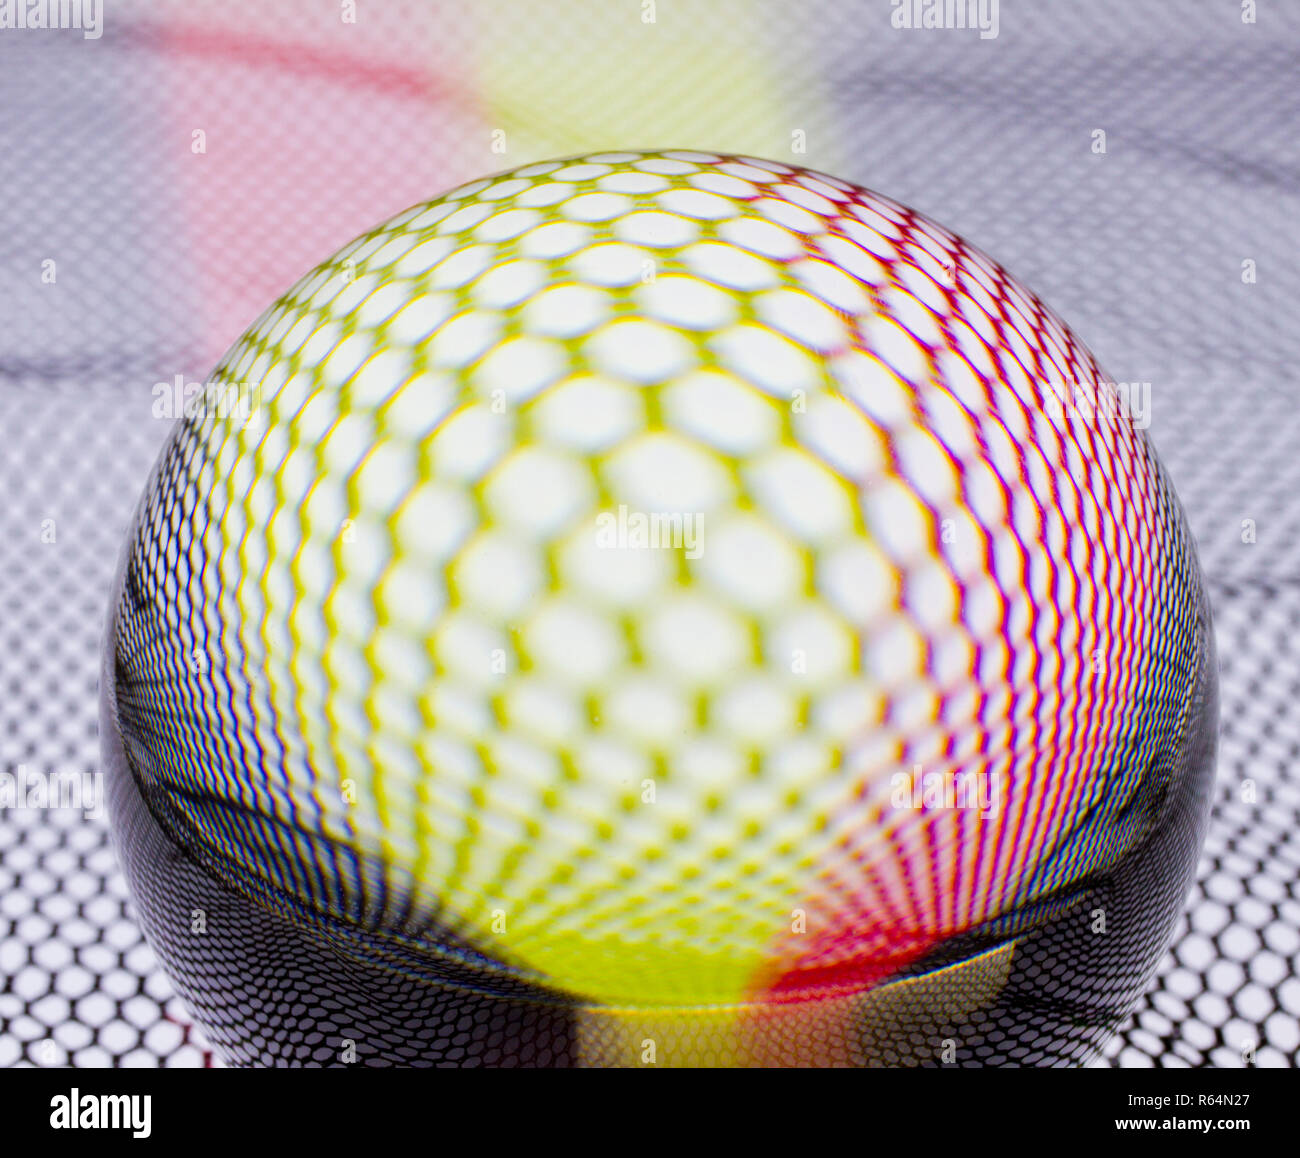 black-red-golden net with glass ball Stock Photo